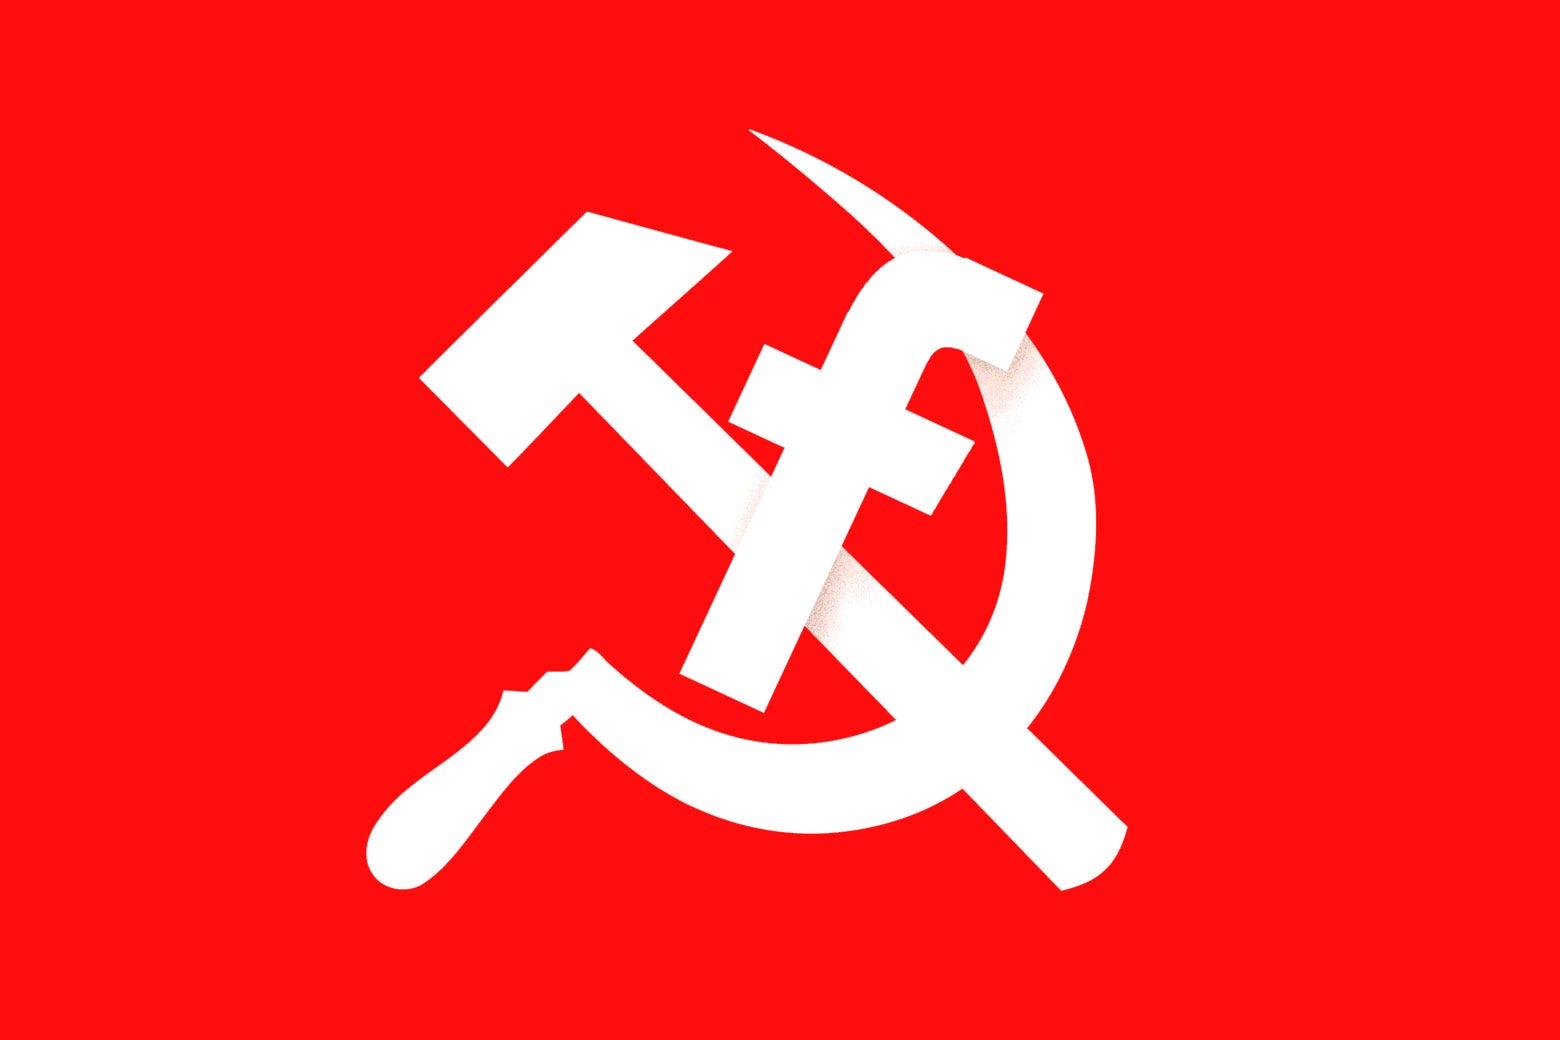 Hammer and sickle with Facebook 'F' symbol.